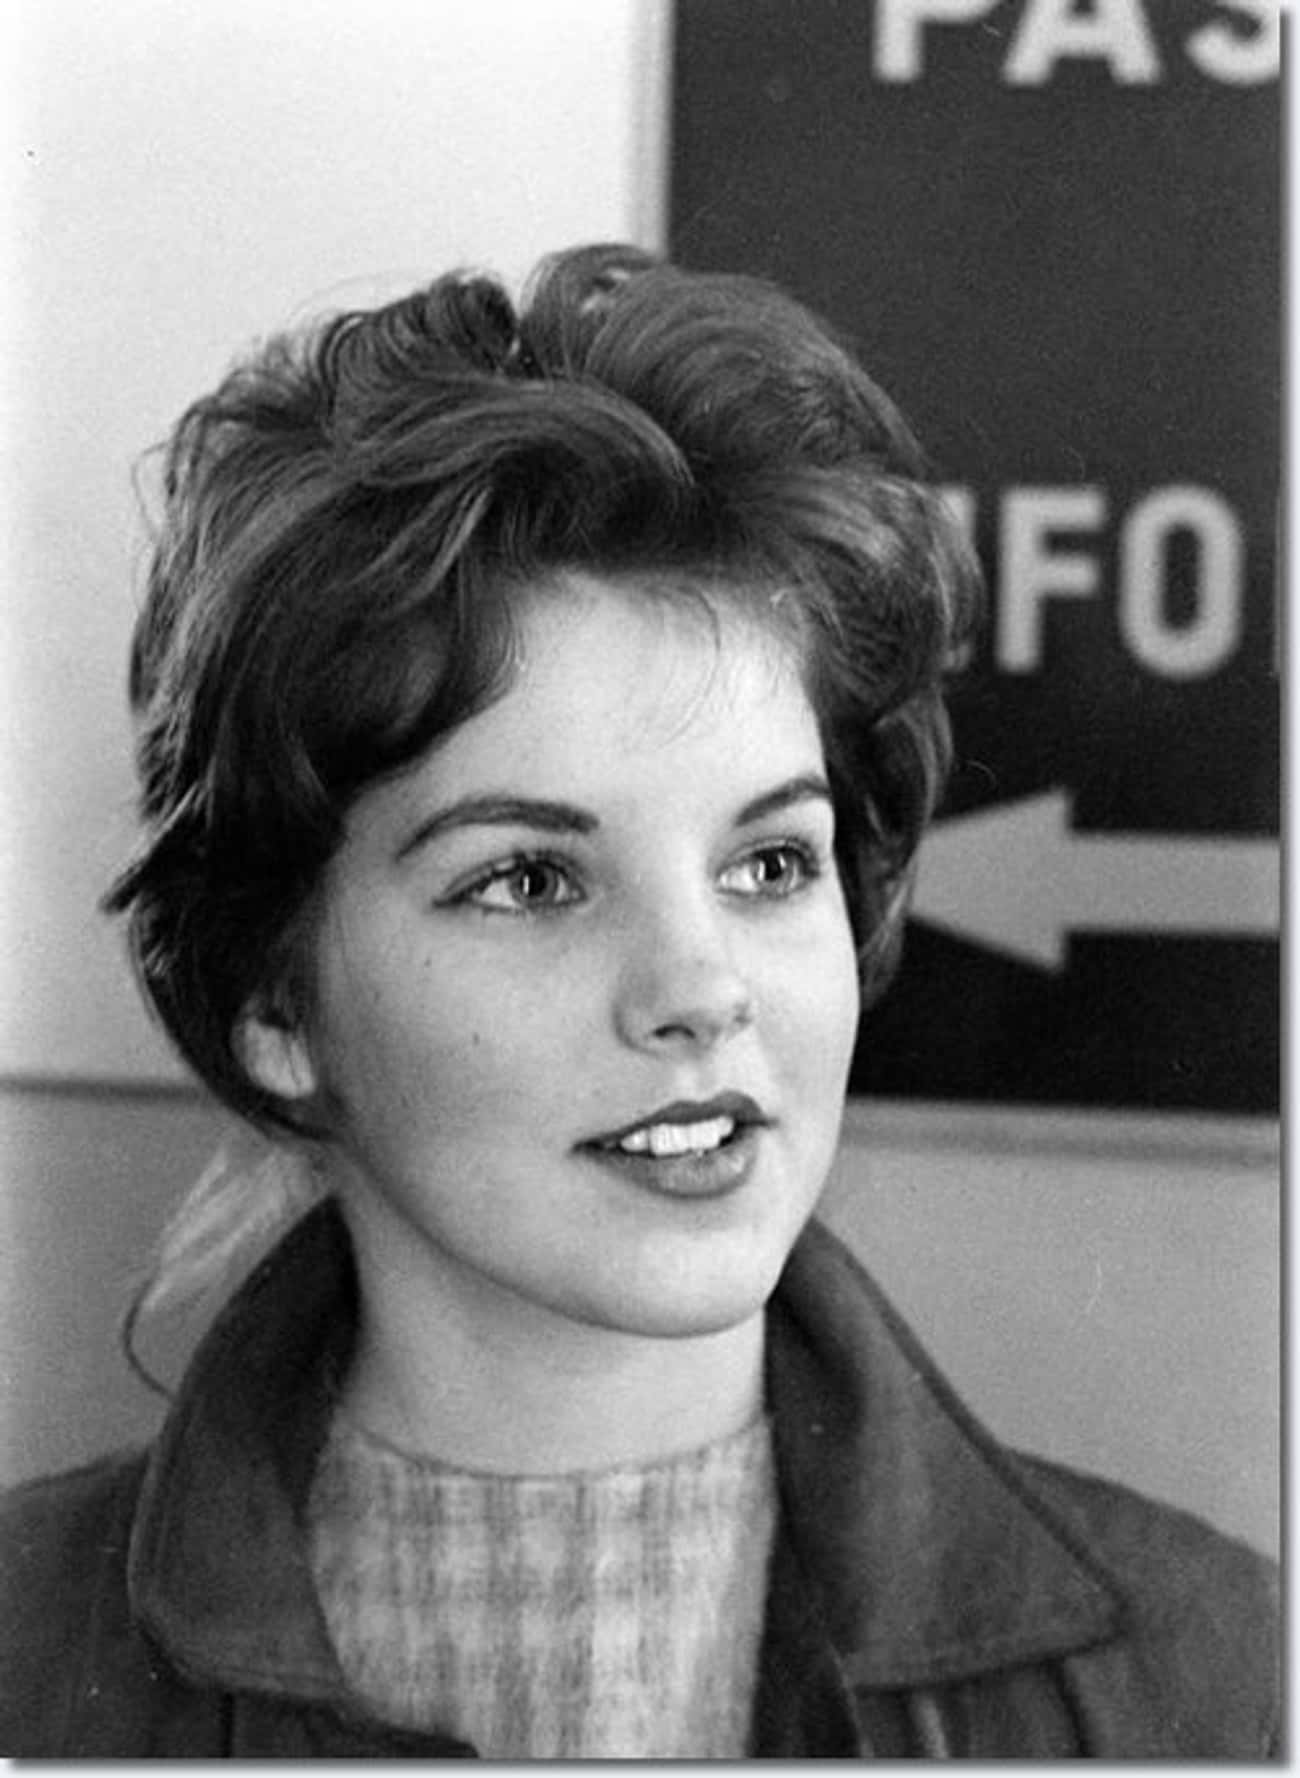 Young Priscilla Presley in a Gray Coat and Turtleneck